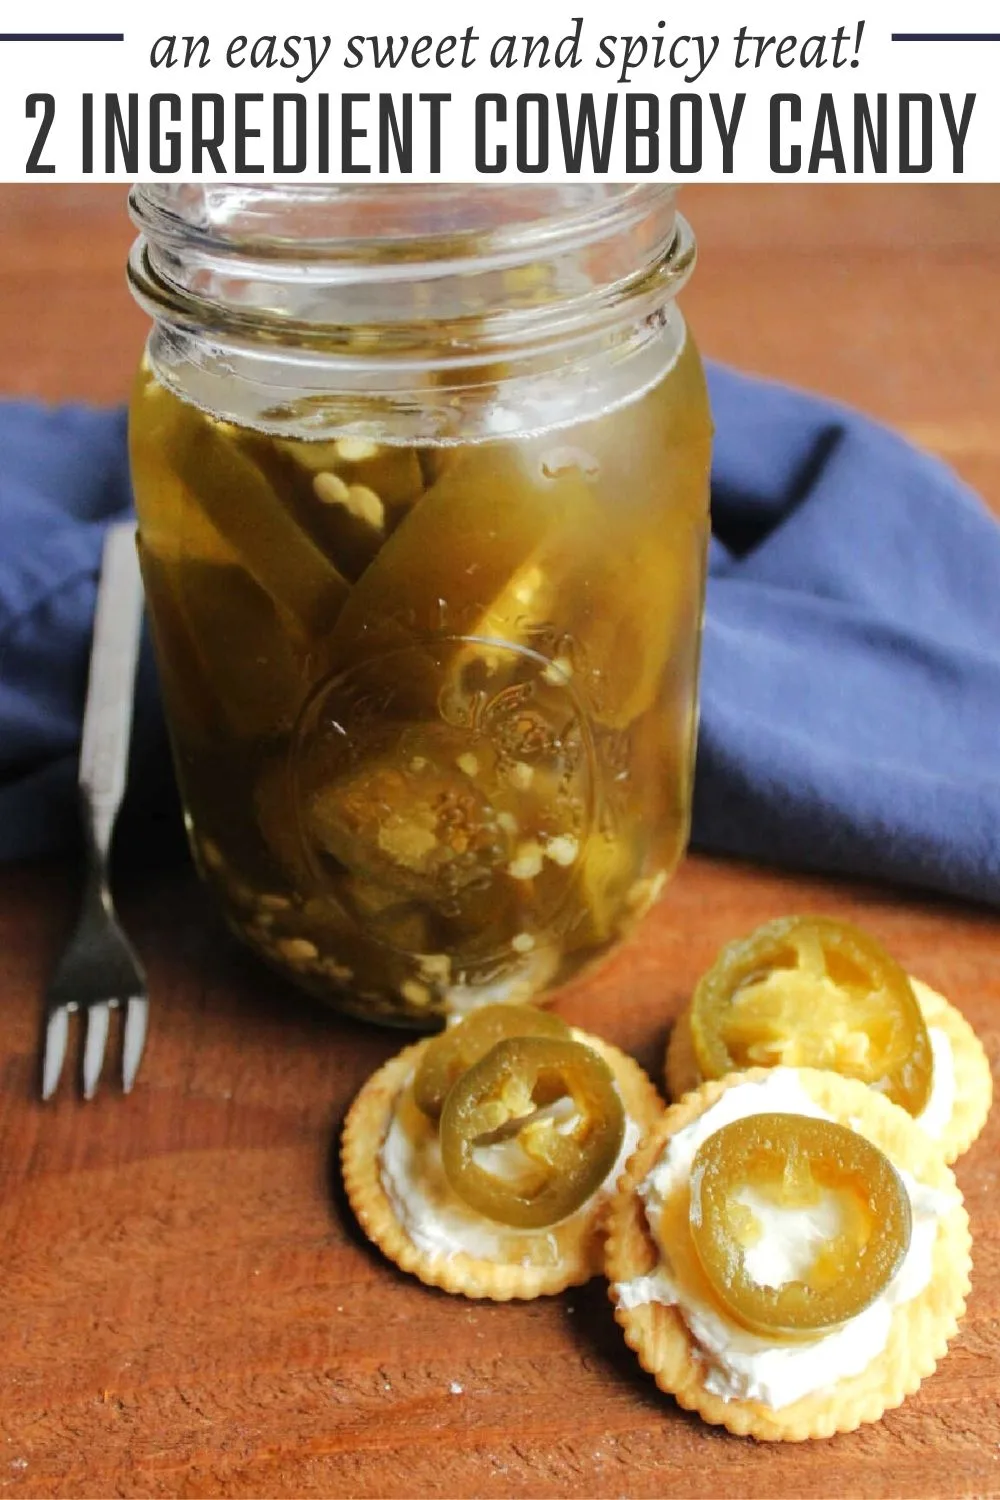 These 2 ingredient candied jalapenos add big flavor to salads, sandwiches and more. The sweet and heat together are pure magic. The best part is this super easy recipe for cowboy candy takes almost no effort to make.